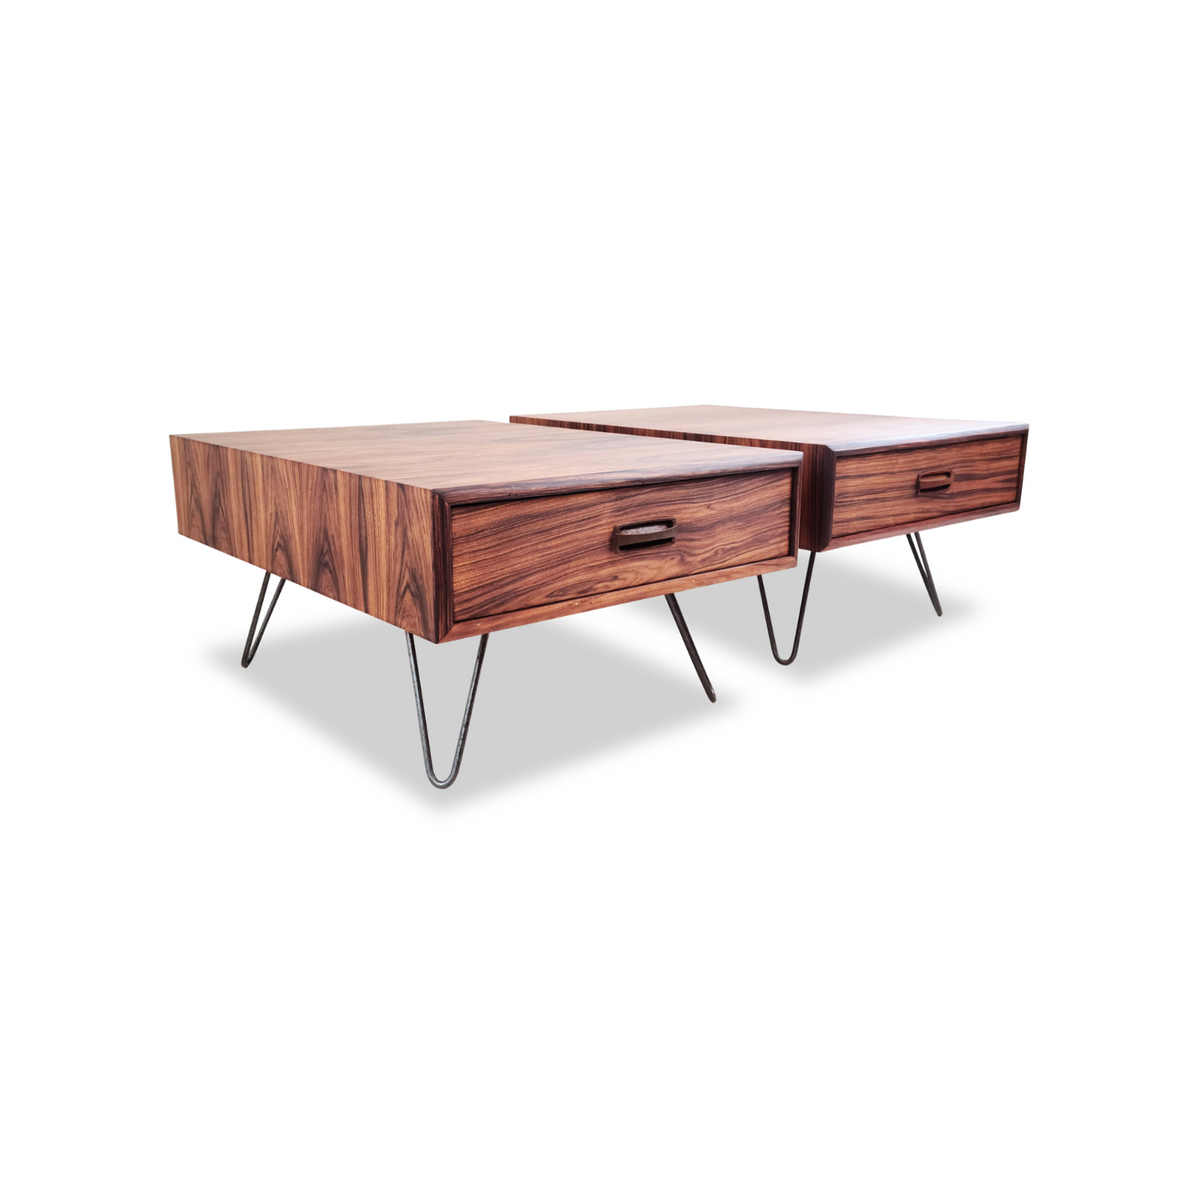 Rosewood End Tables with Drawers